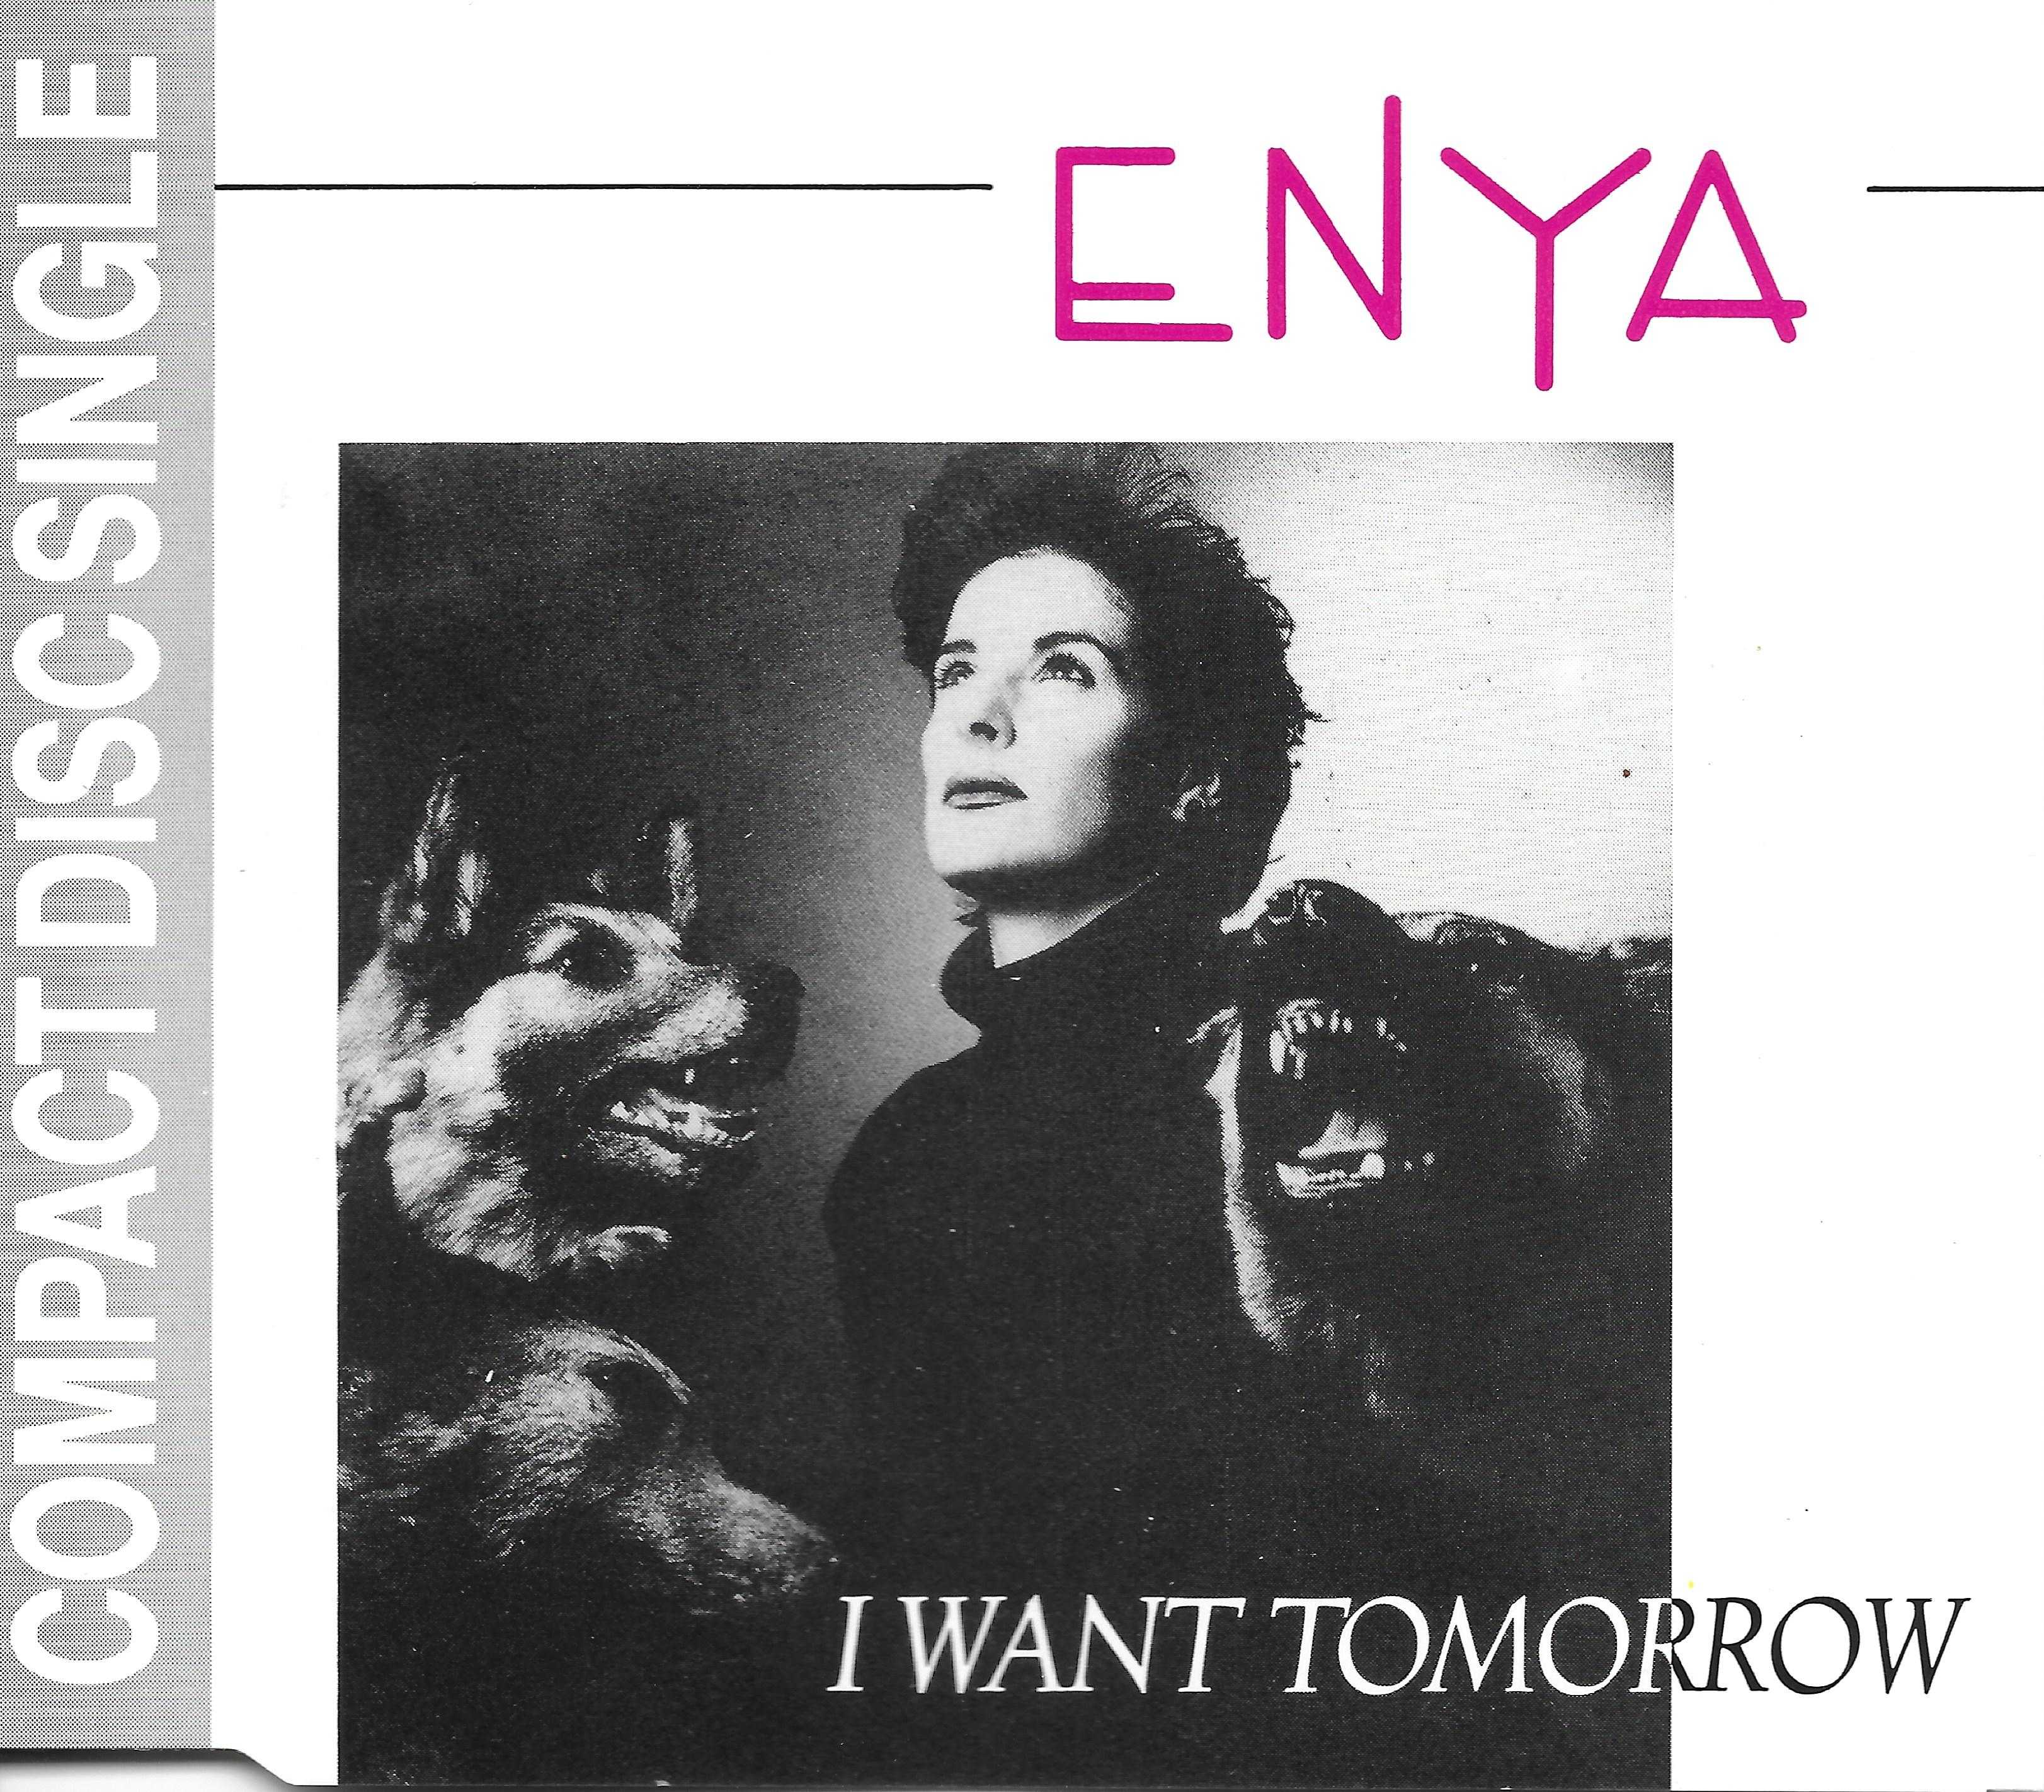 Picture of CD RSL 201 I want tomorrow (The Celts) - Dutch import CD single by artist Enya from the BBC records and Tapes library